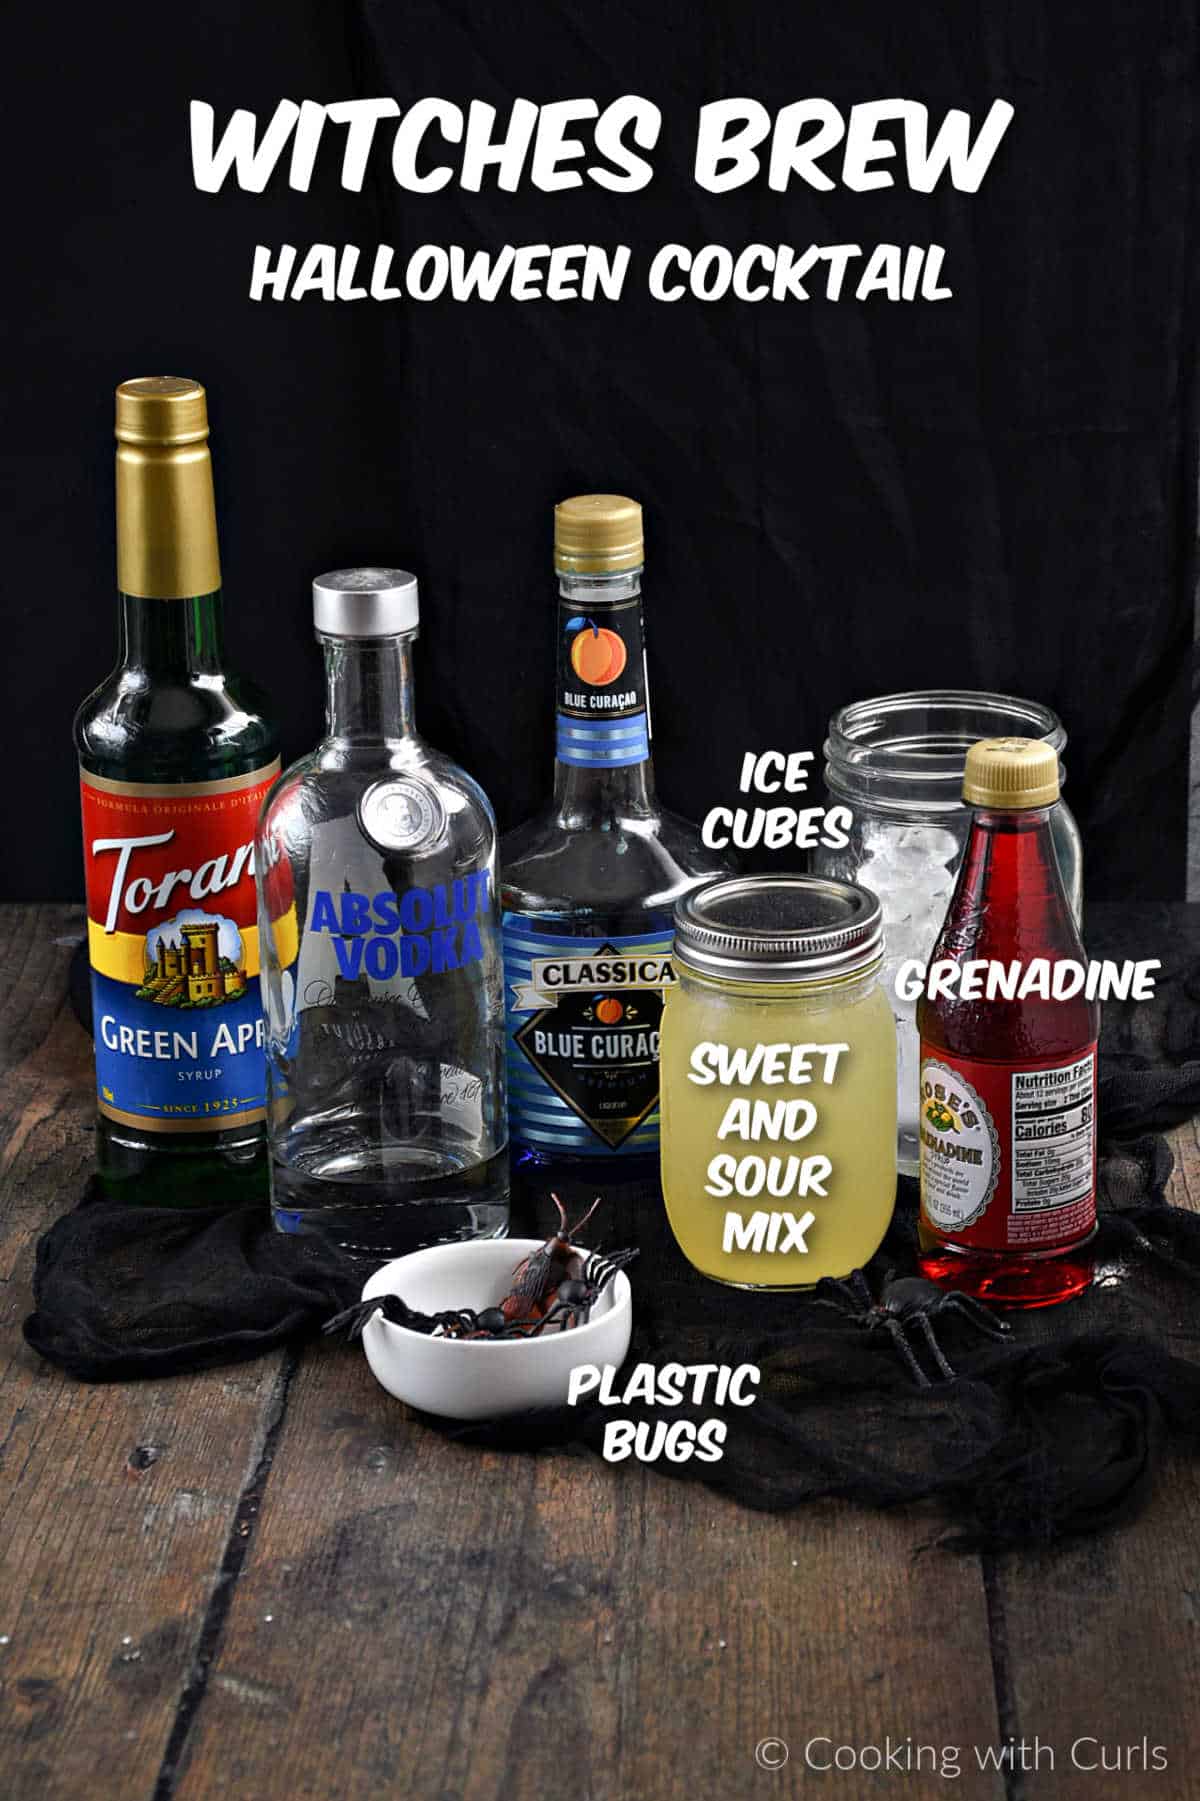 Ingredients to make Witches Brew Cocktail for Halloween.